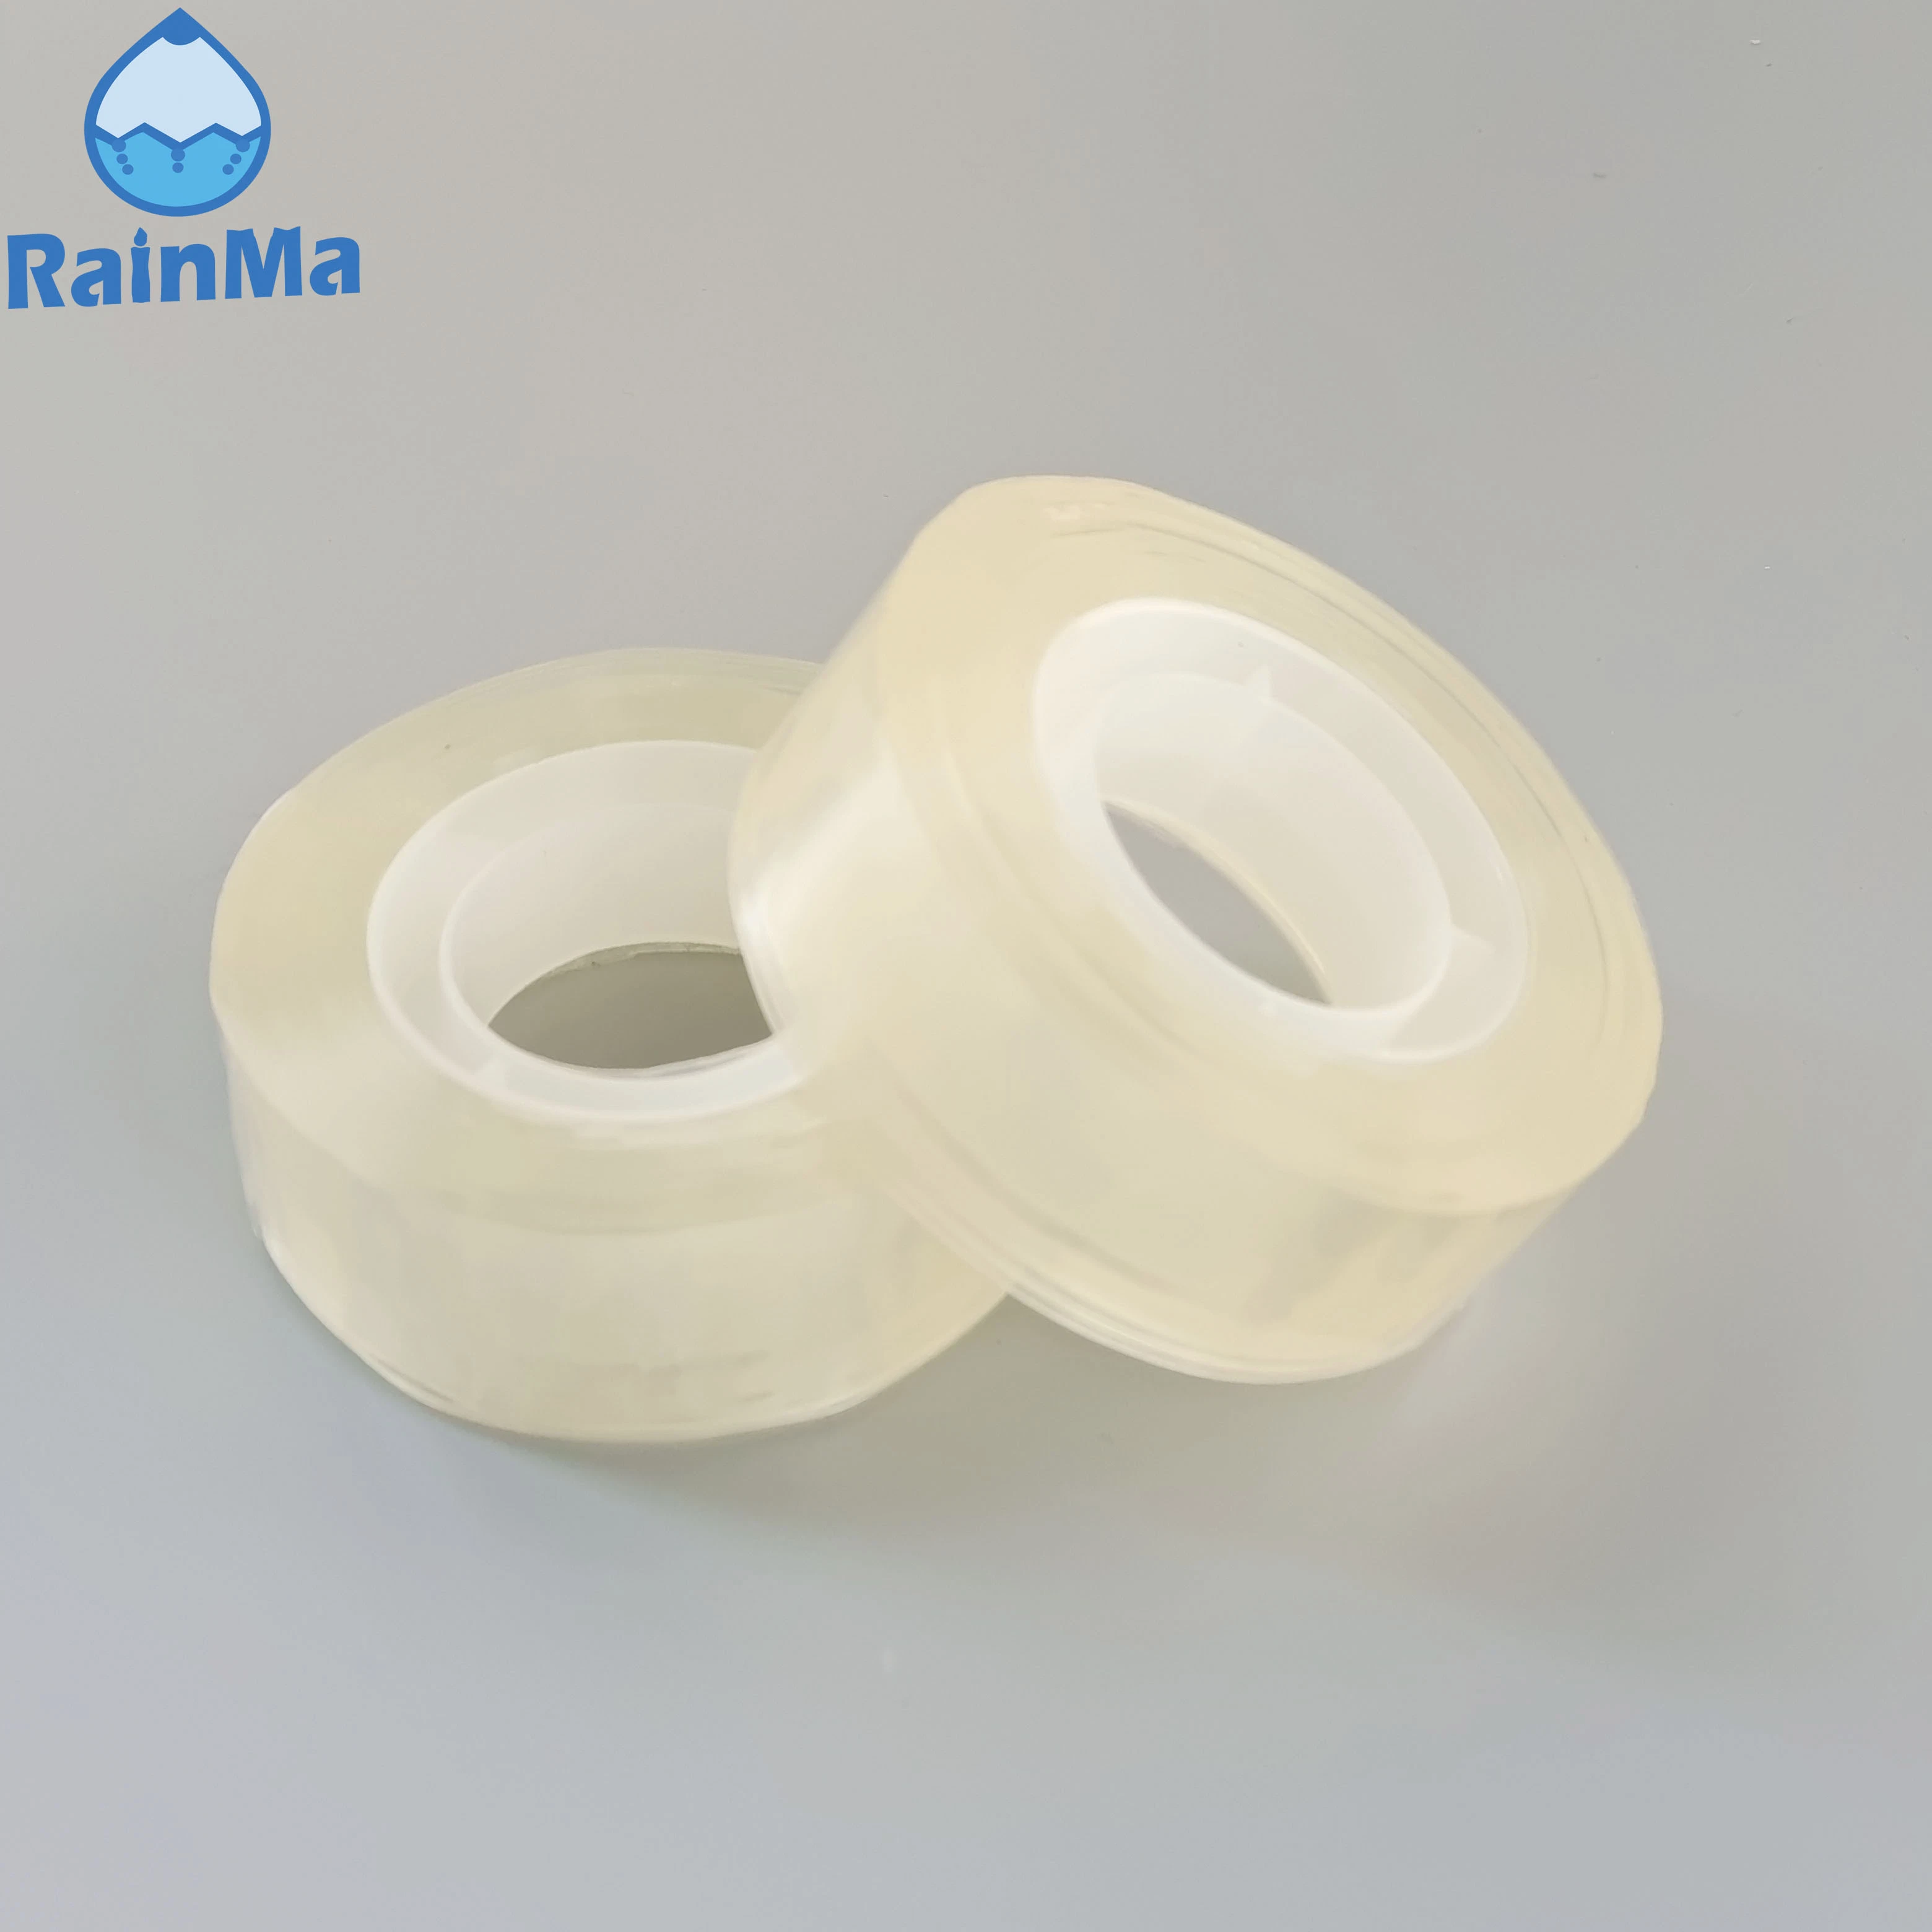 18mm BOPP Stationery Small Adhesive Packing Tape Transparent Tape for Students